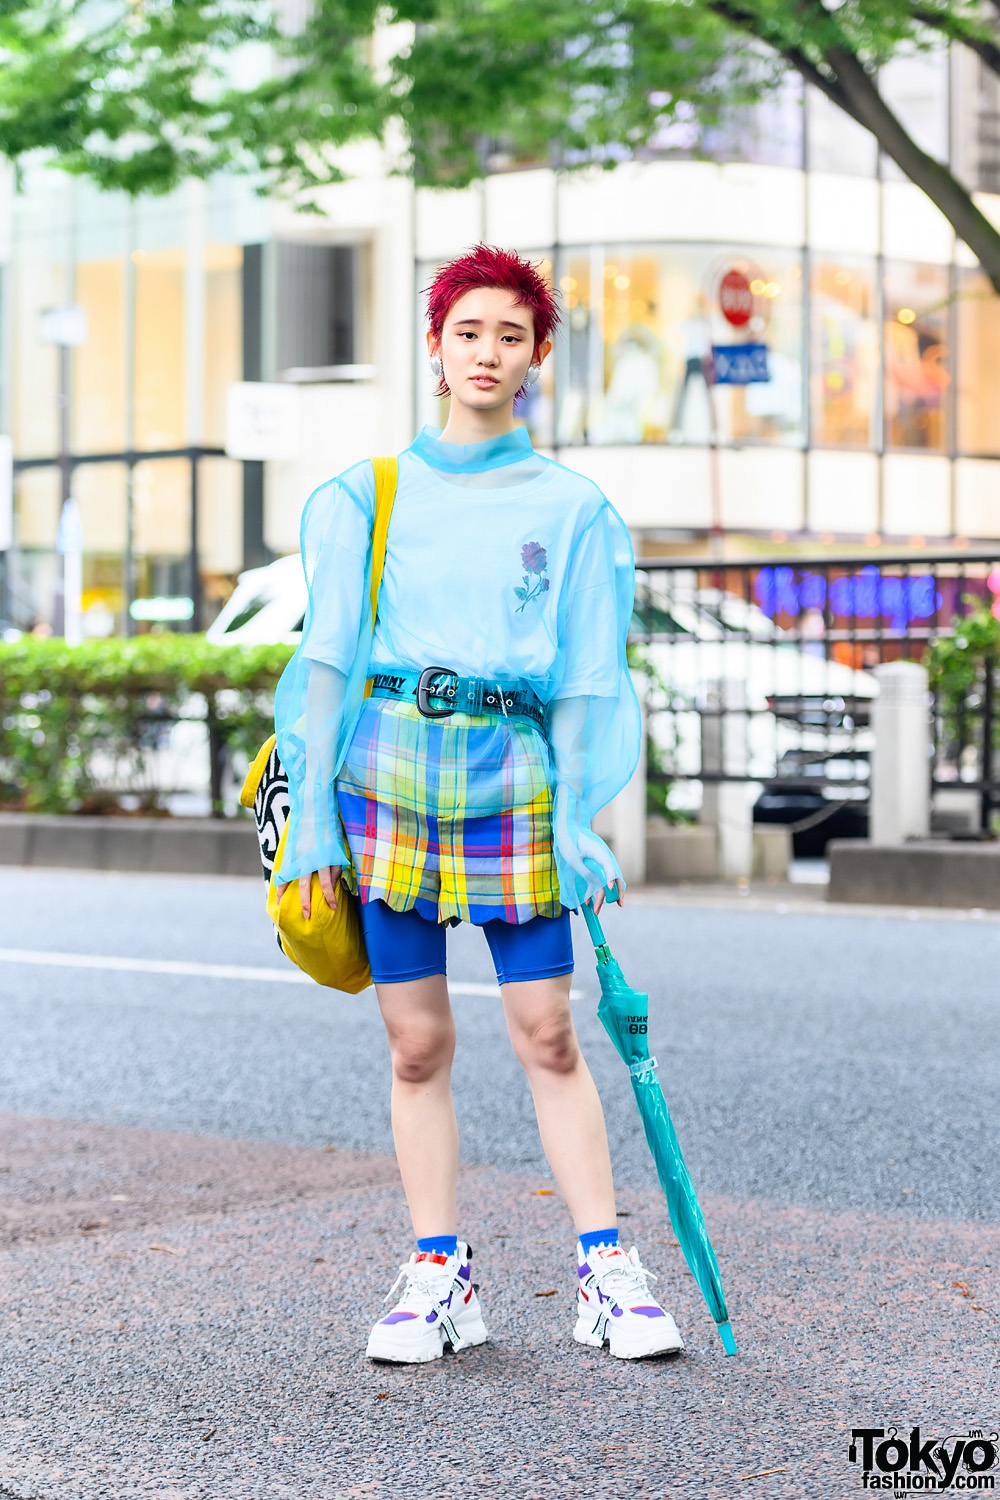 Model in Teal and Yellow Sheer Fashion w/ Pink Bob Hairstyle, Dew E Dew E Sheer Top, Aymmy In The Batty Checkered Scalloped Hem Shorts, Little Sunny Bite Tote, Jaynise Sneakers, Clear Belt, Clear Umbrella & Heart Earrings